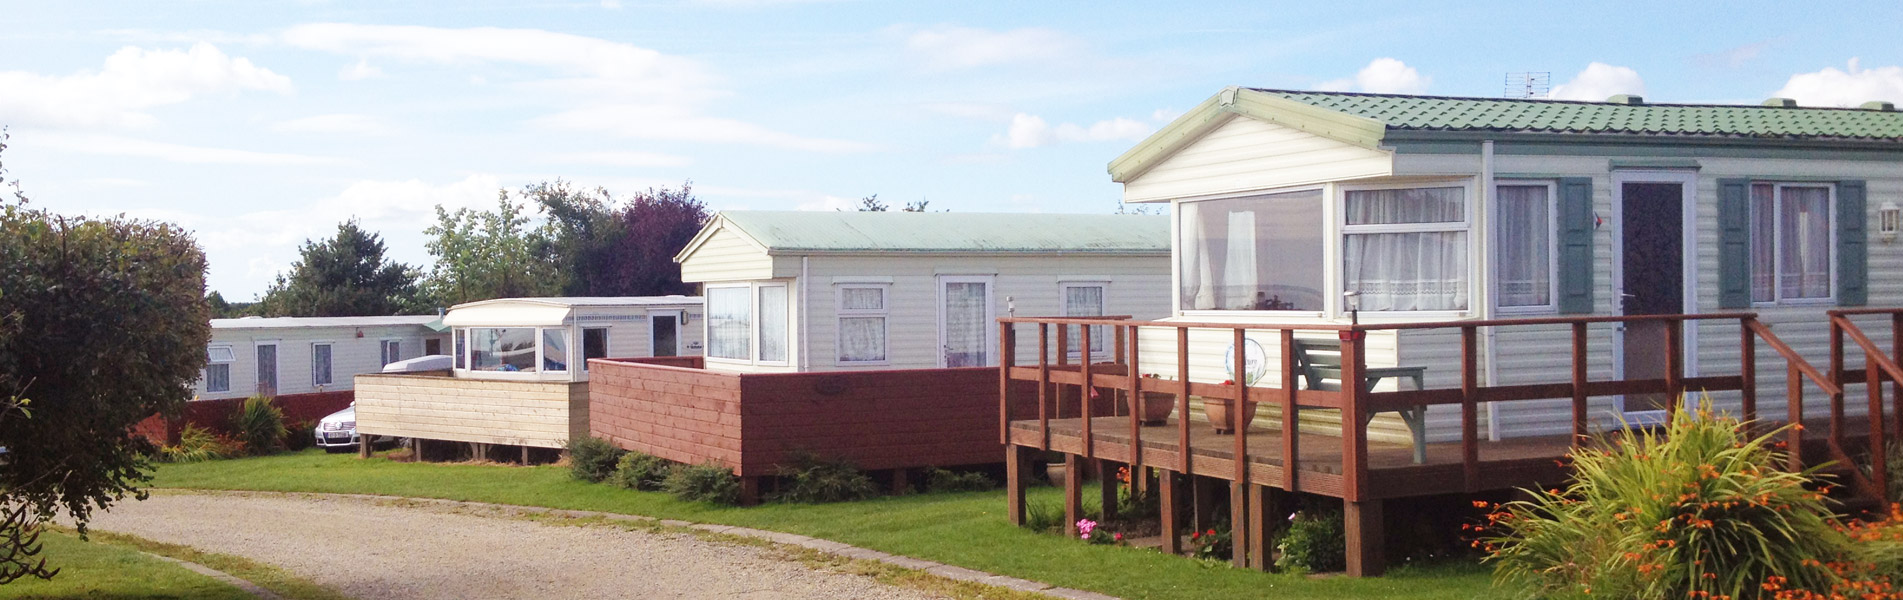 Buy Mobile Homes at Gleeson's Holiday Park, County Wicklow.